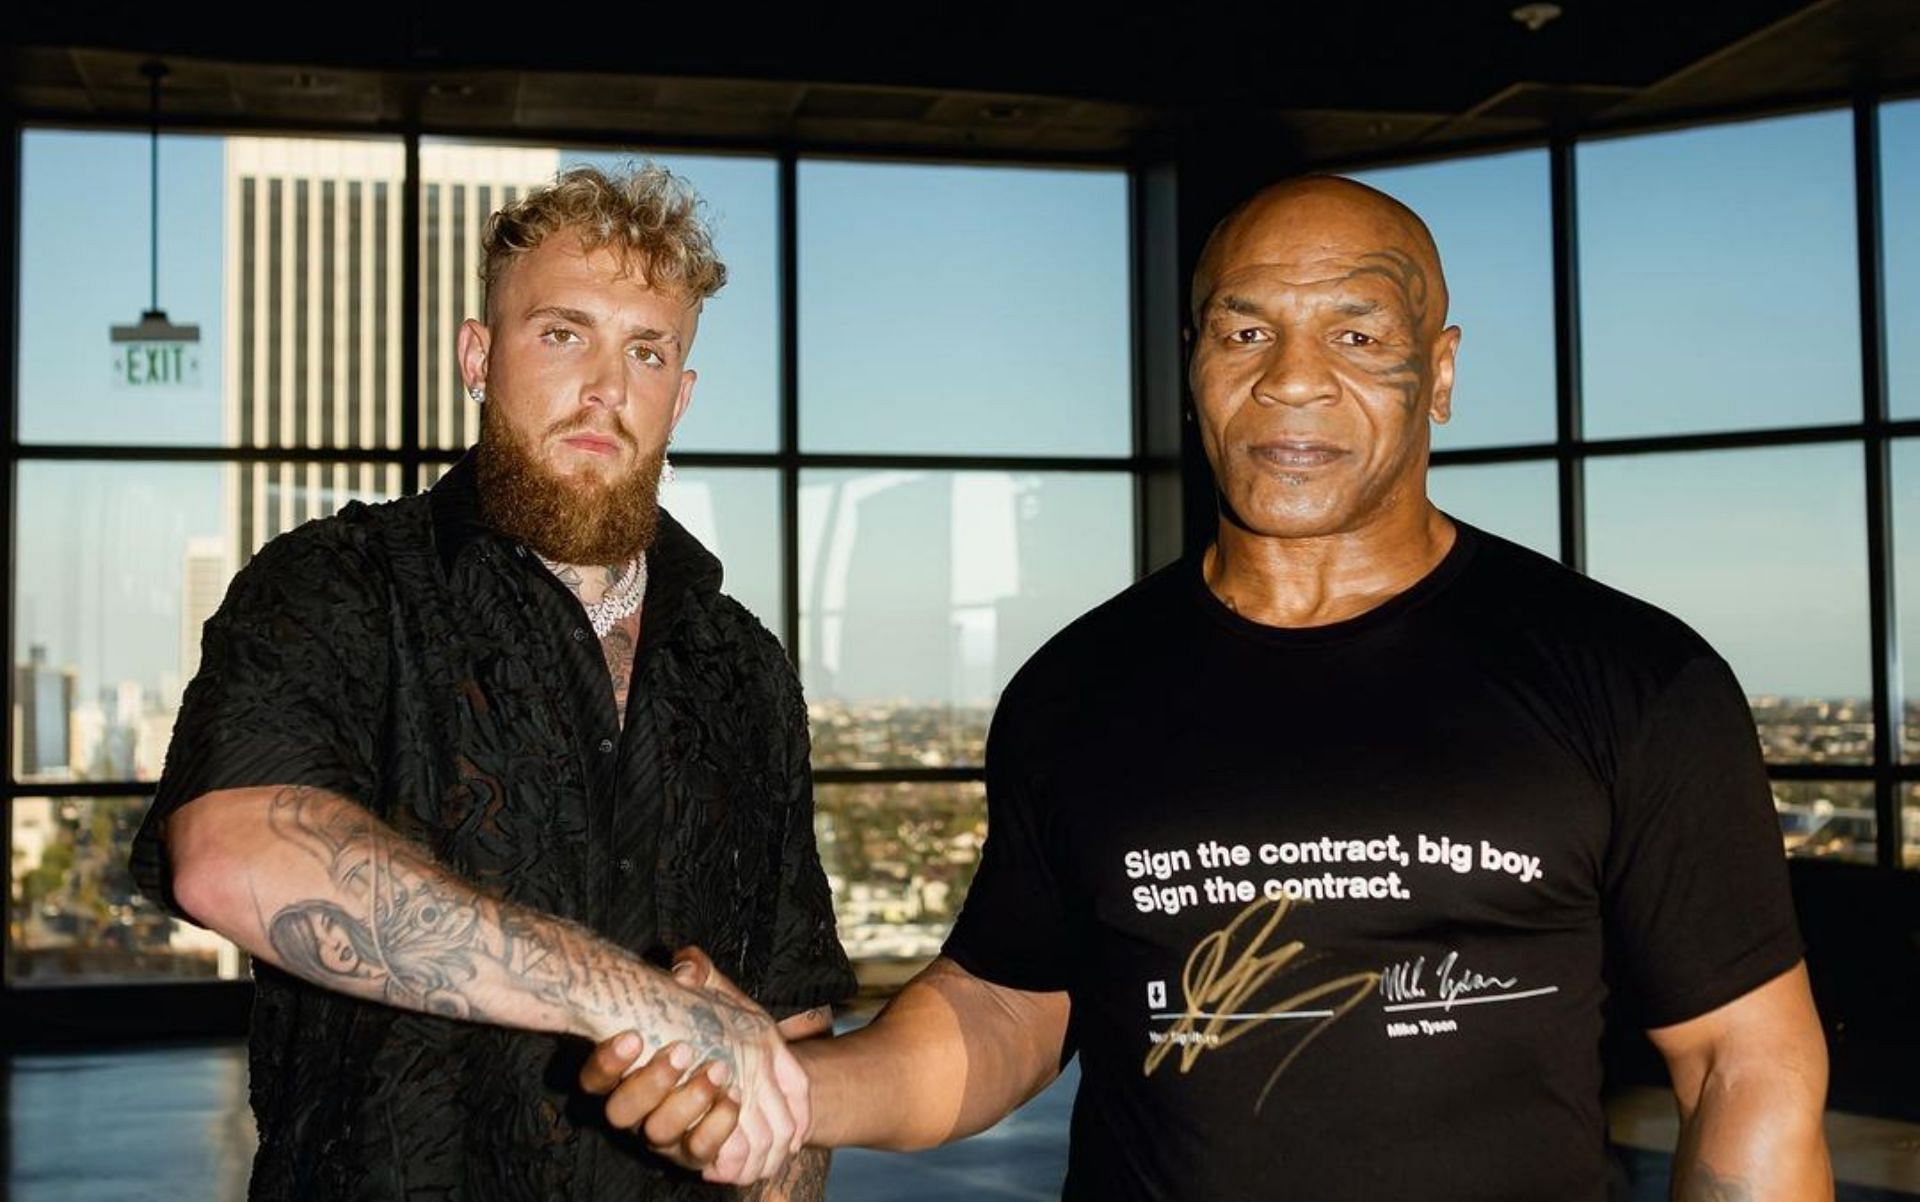 A UFC legend is against the Jake Paul (left) vs. Mike Tyson (right) fight getting rescheduled. [Image via @jakepaul on Instagram]